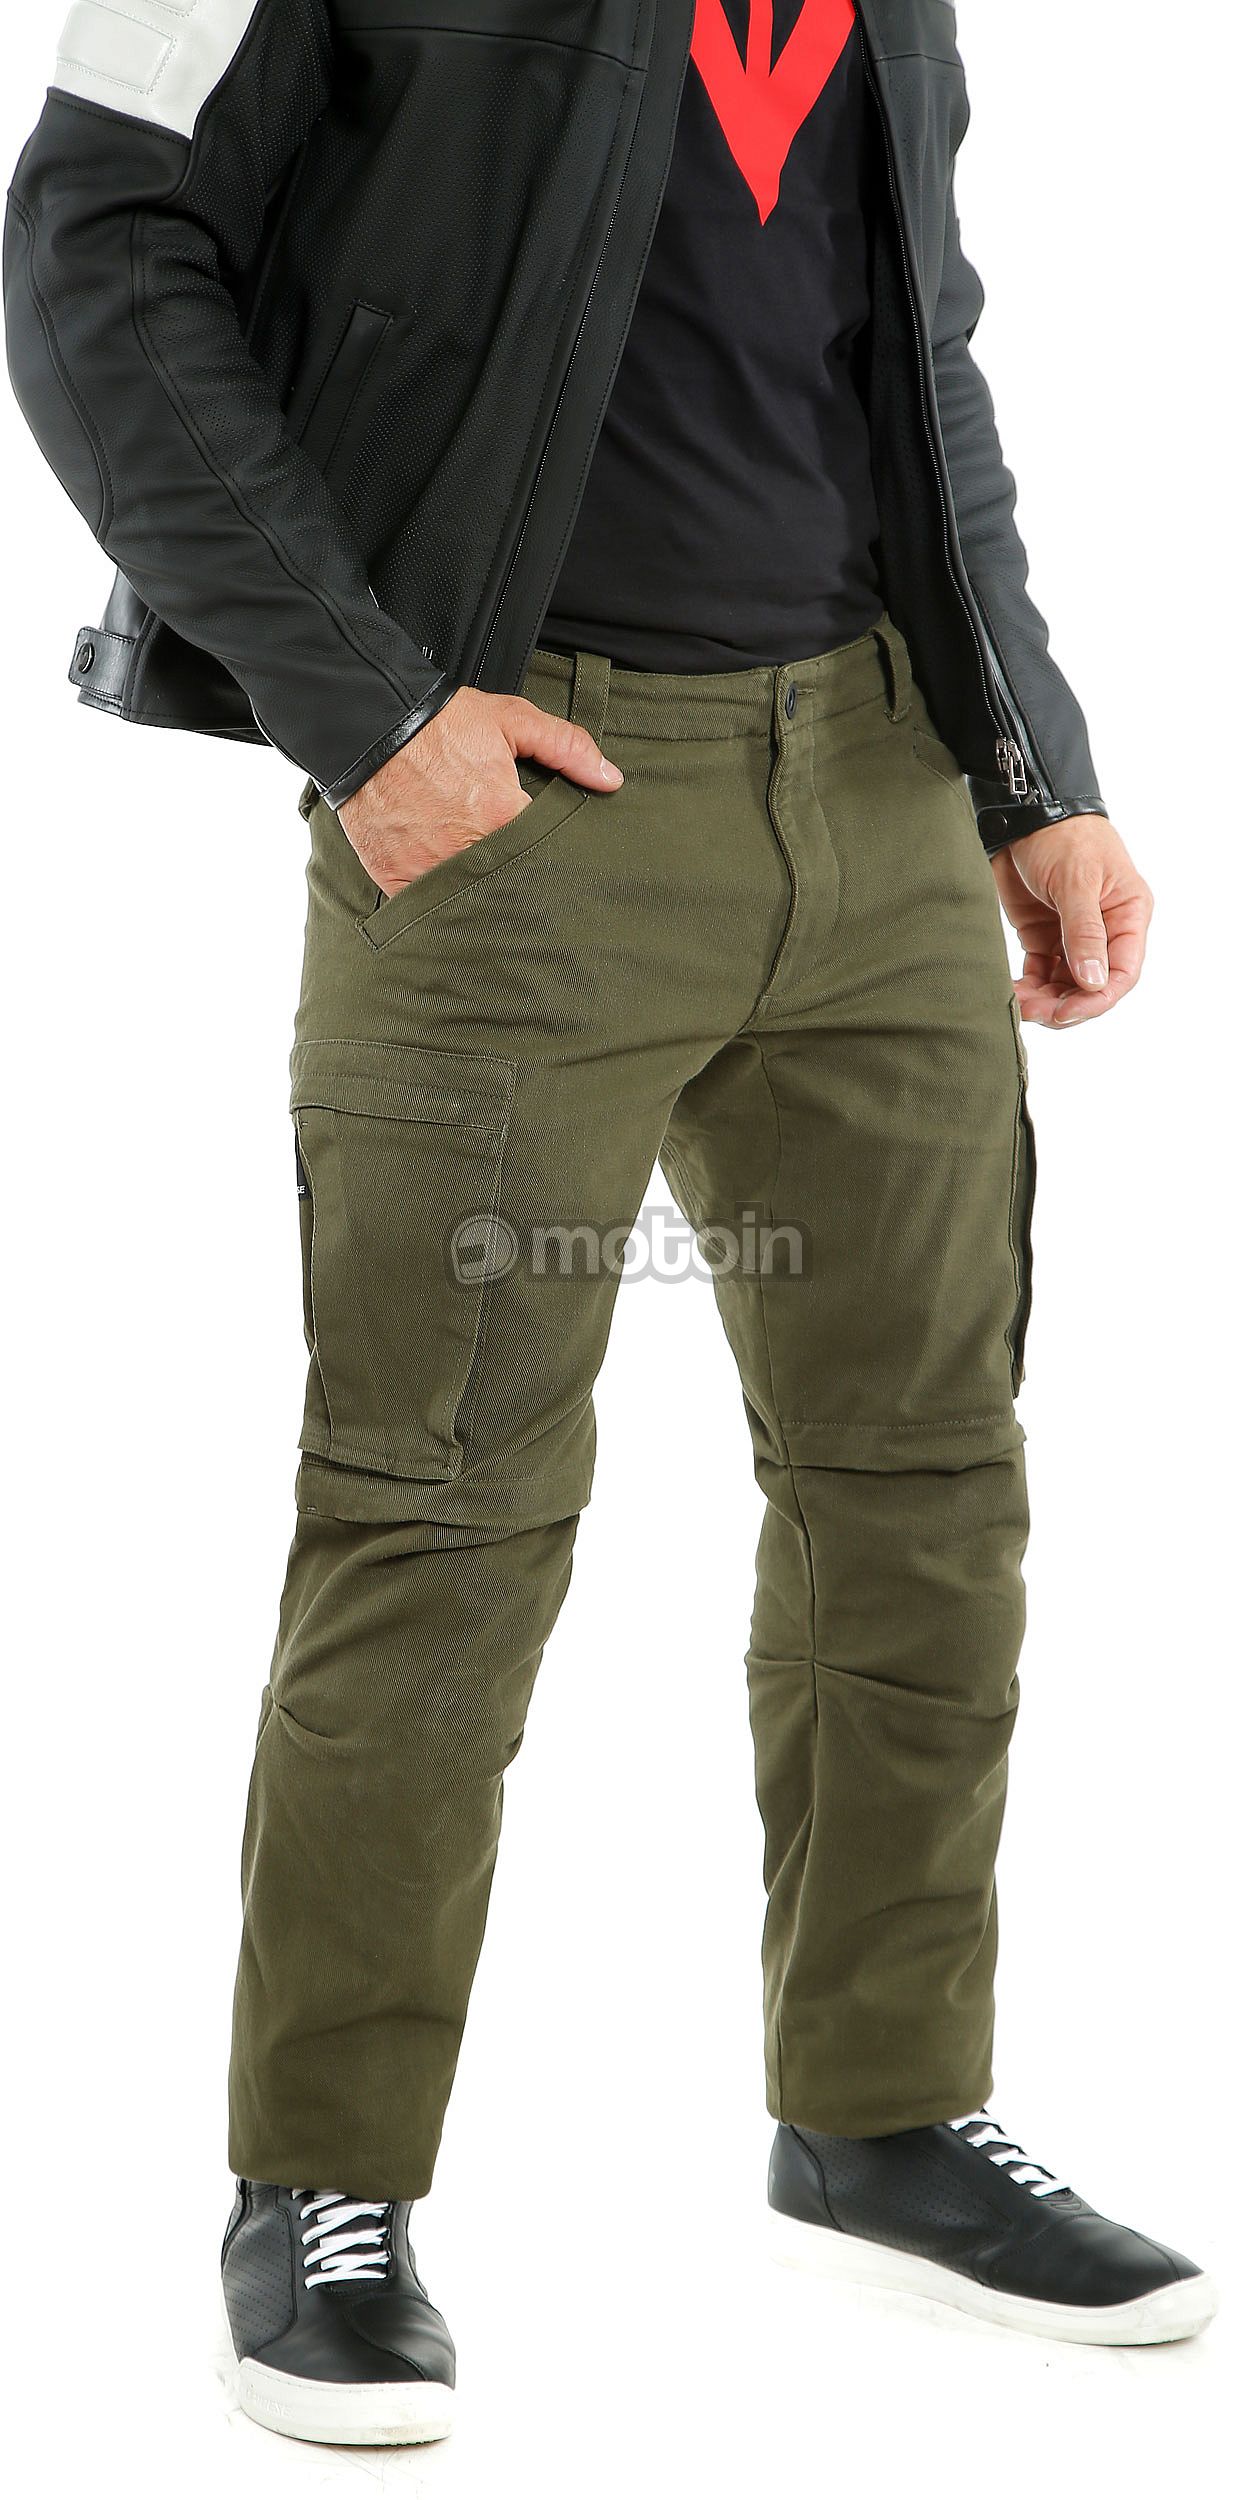 Dainese Amsterdam DDRY Pants  Black  Doble Direct